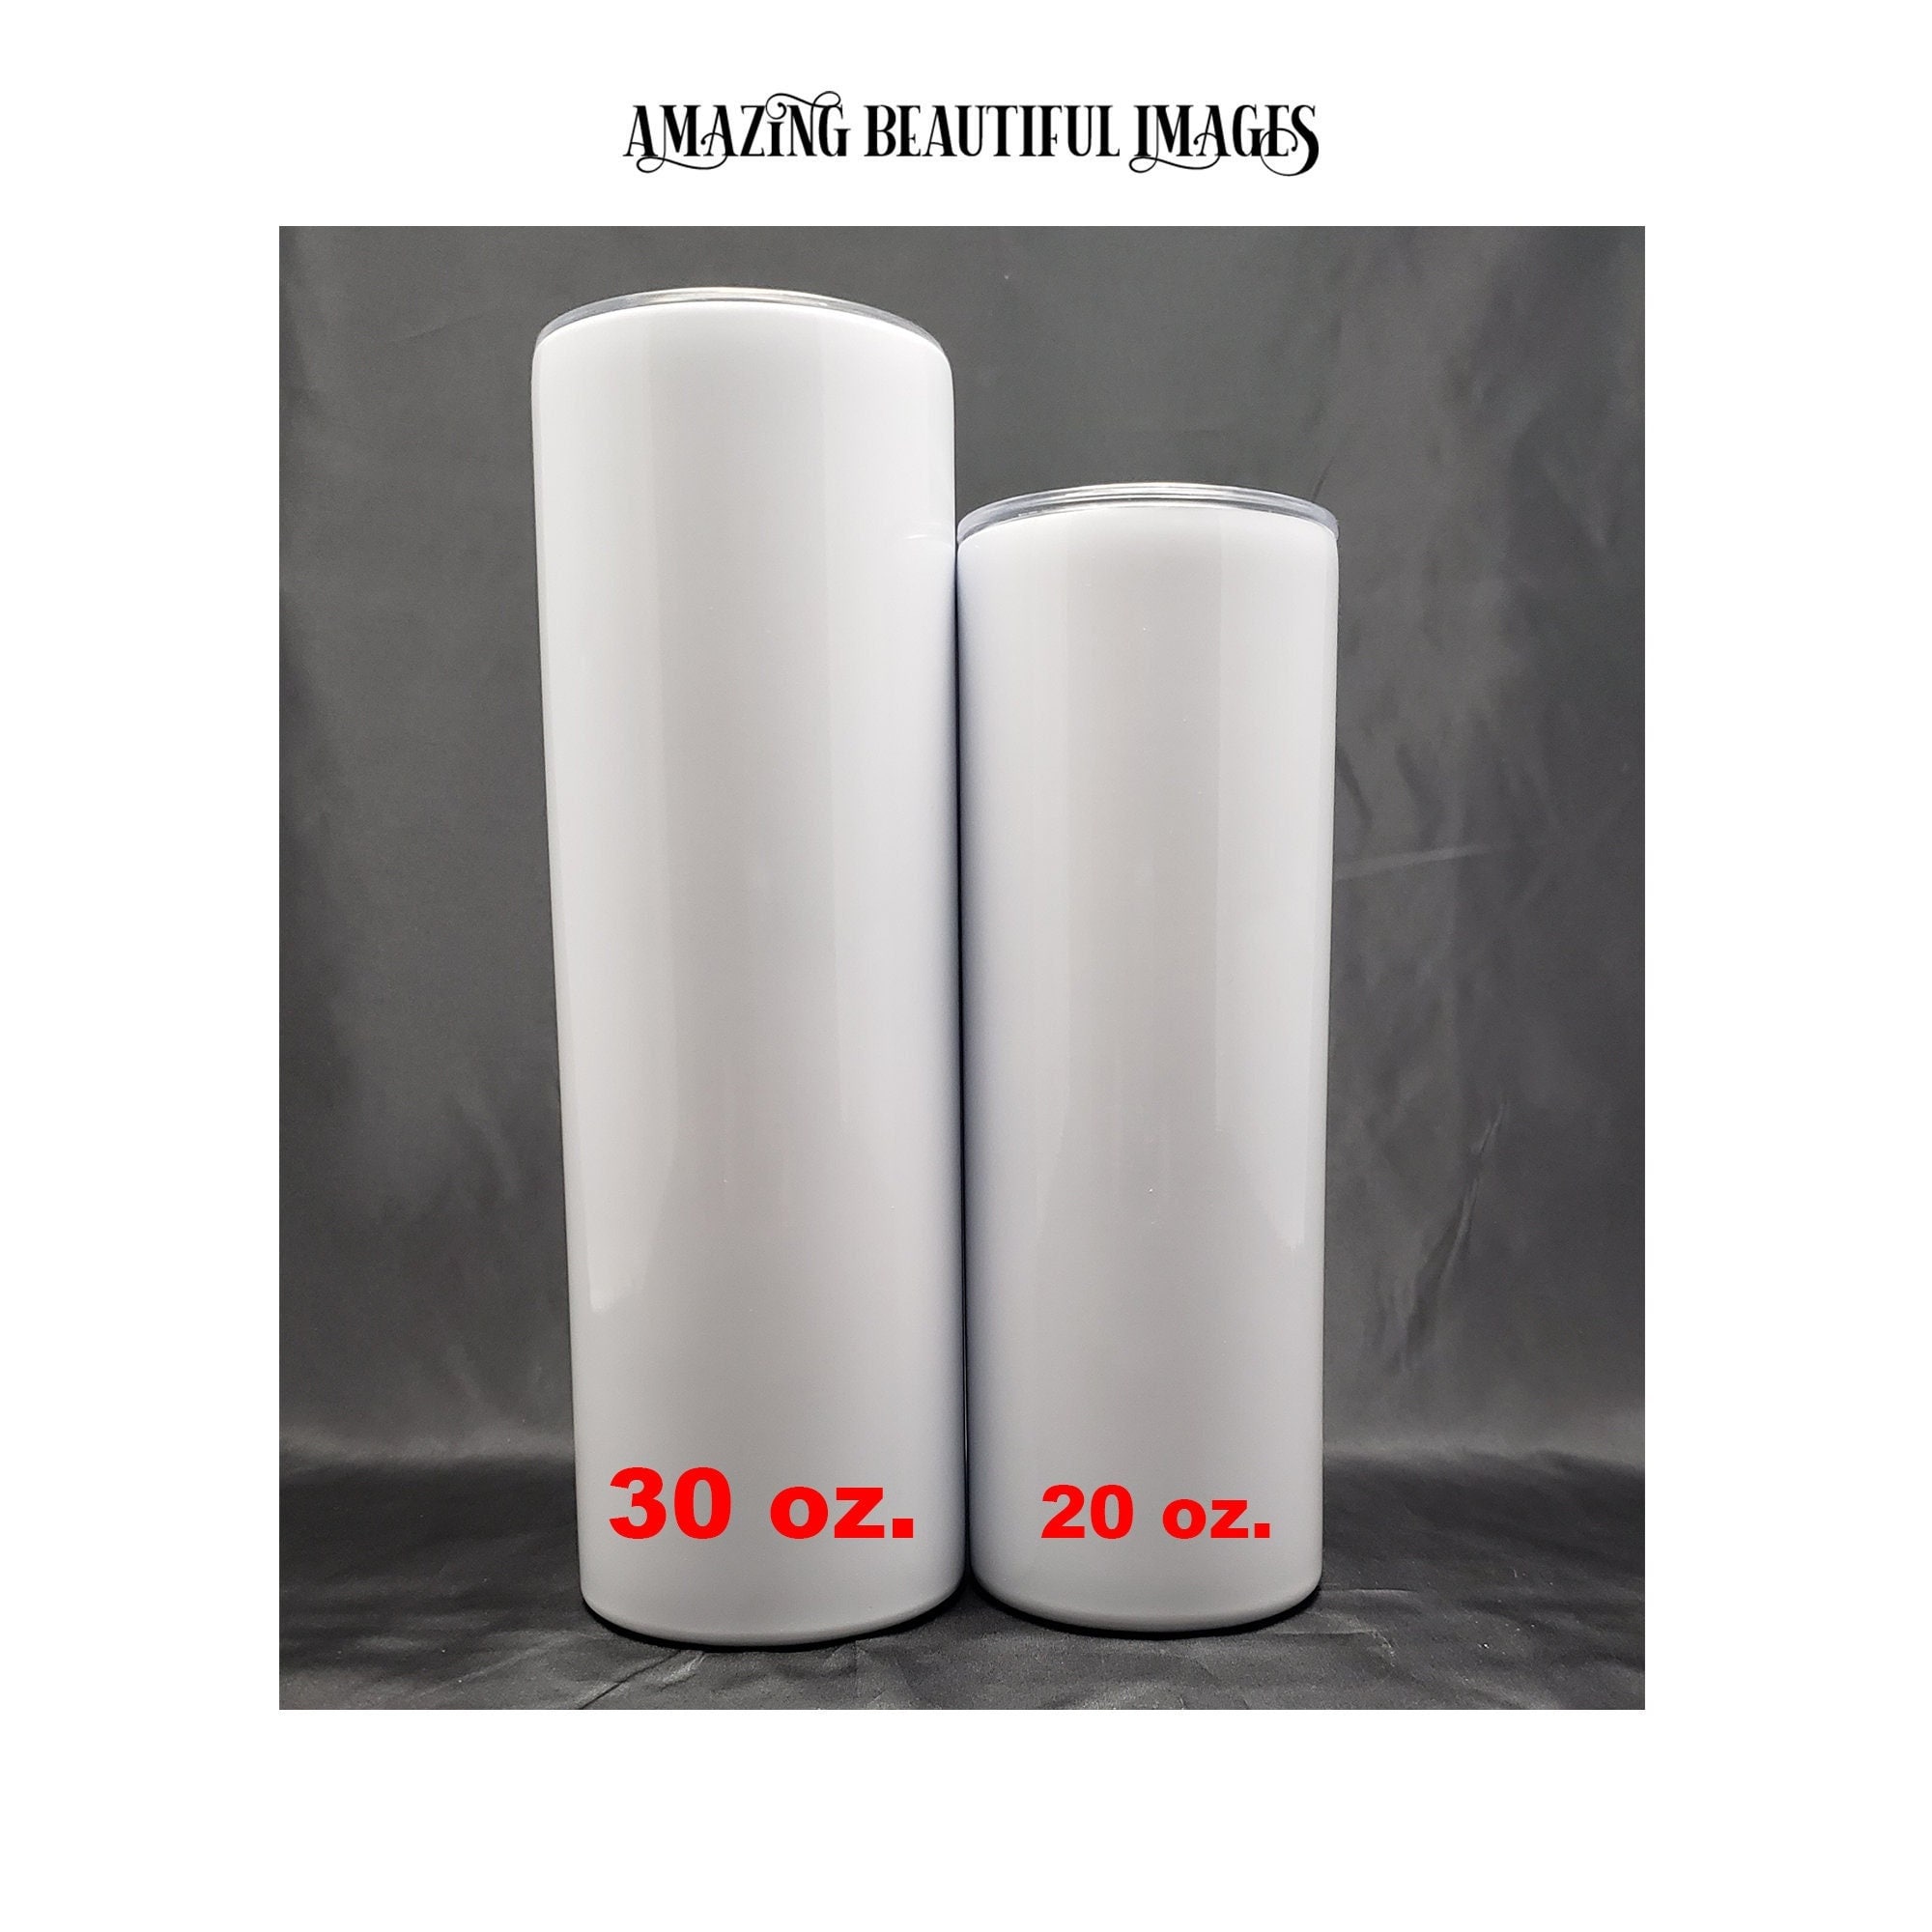 Sublimation Shrink Wrap Film for 12/15/16/20/30oz Tumblers, Perforated for Easy Removal 12/15/16 oz.